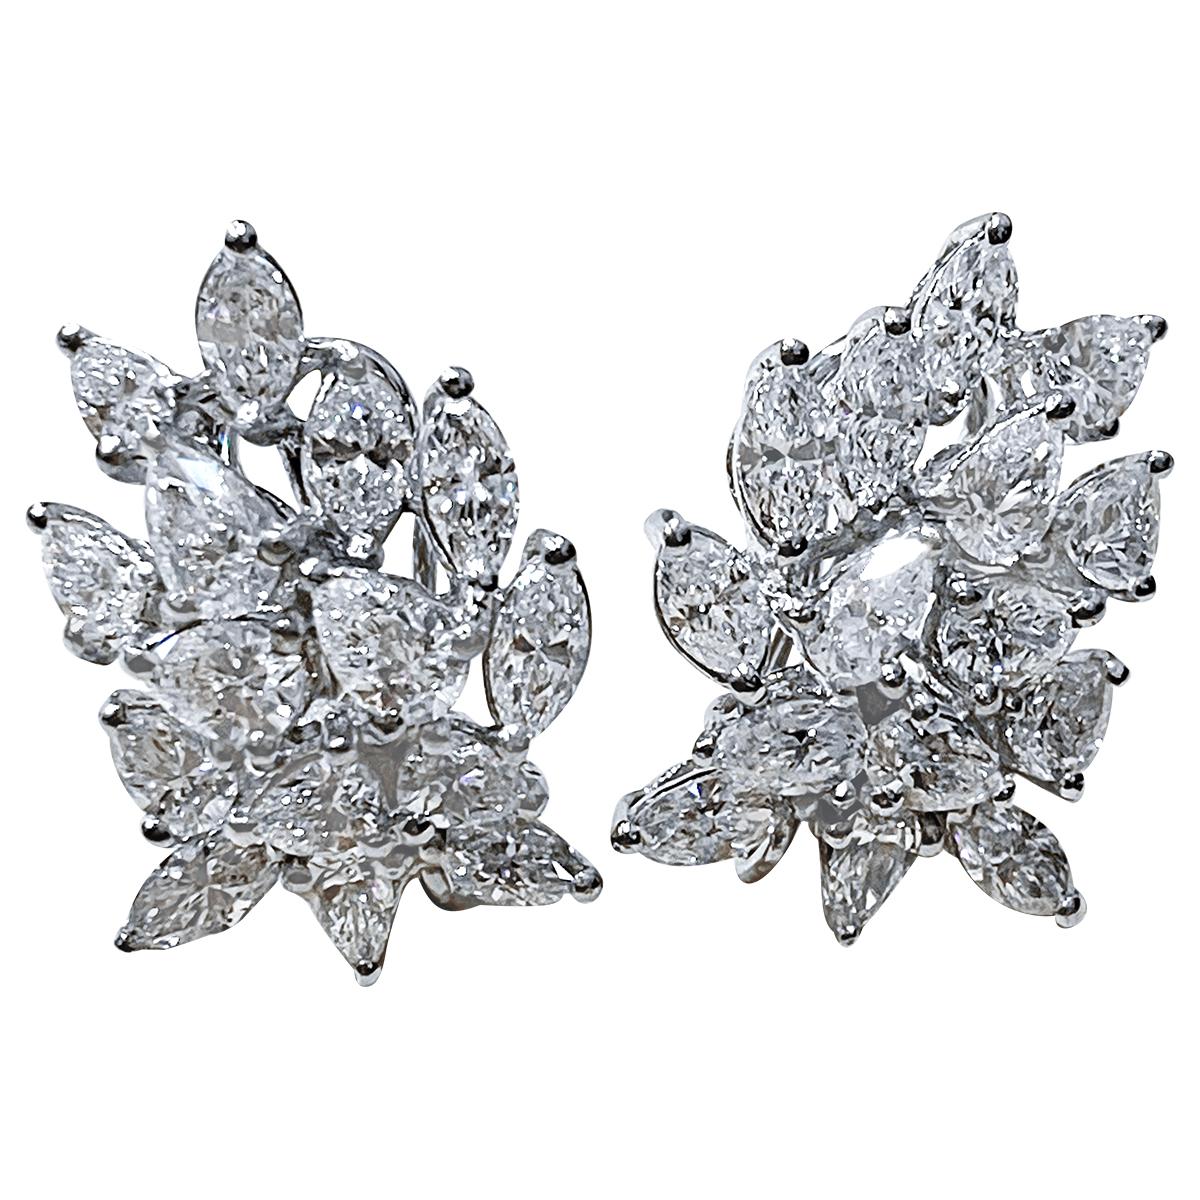 Women's or Men's 20 Carat Marquise and Pear Shape Diamond Cluster Stud Earrings in Platinum 1960'